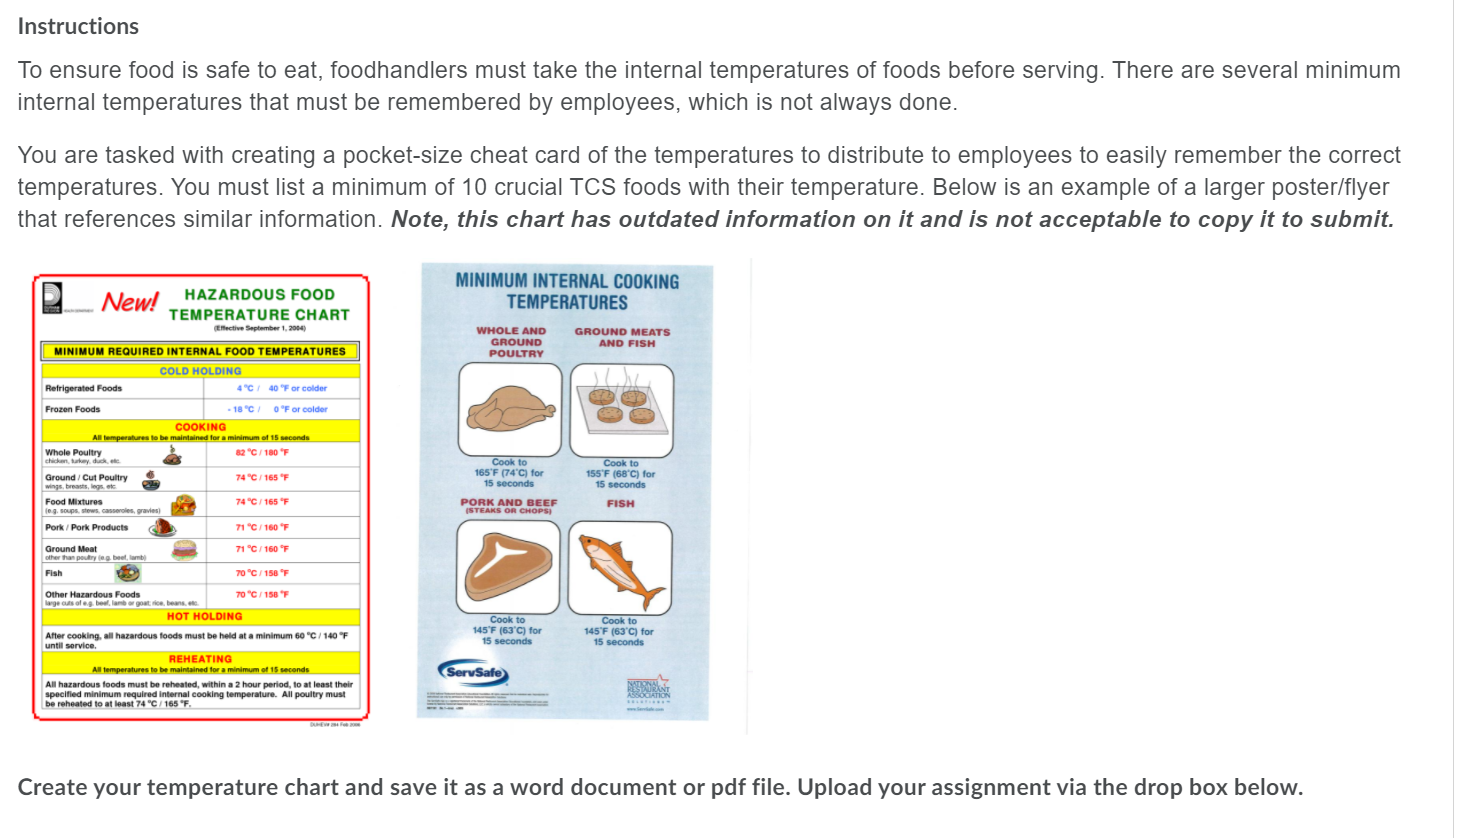 Practice #SafetyFirst When checking food temperatures: - Insert a